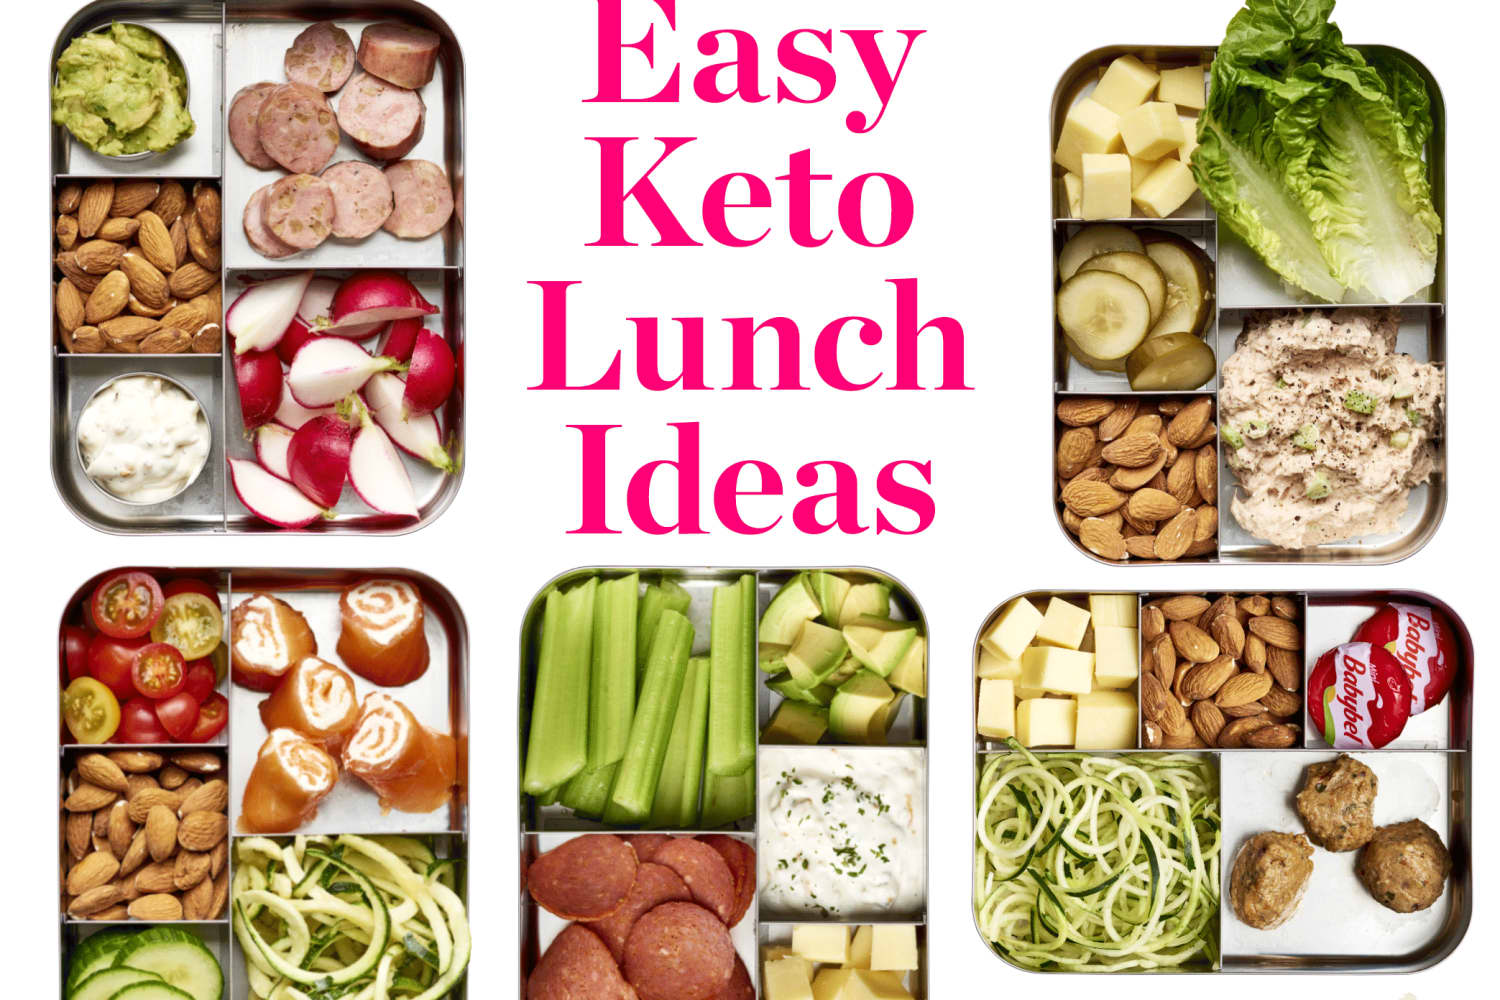 10 Easy Keto Lunch Ideas With Net Carb Counts The Kitchn 3822